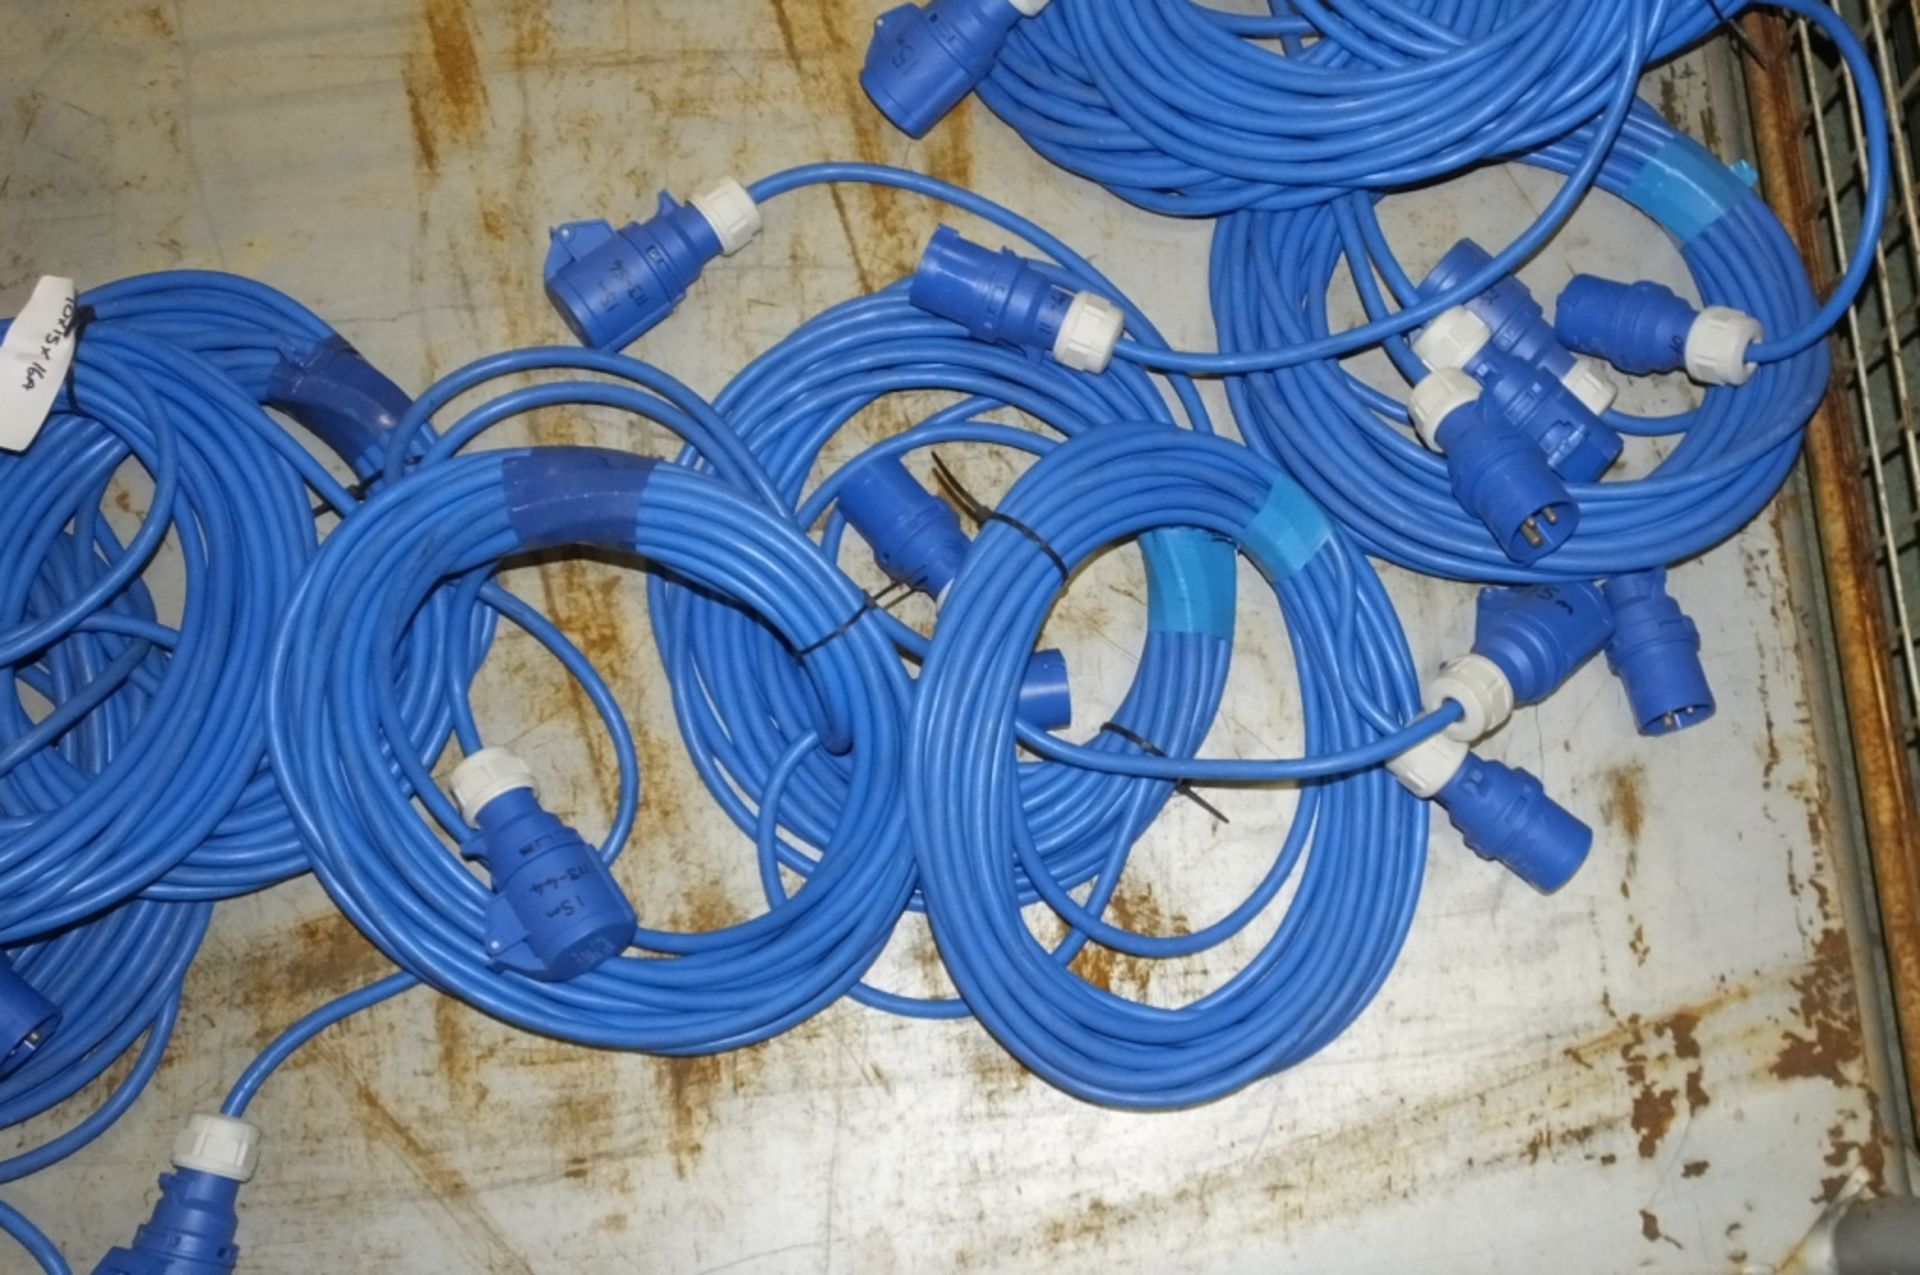 10x 15m x16 A Tent Electrical Cables - Blue - Image 2 of 2